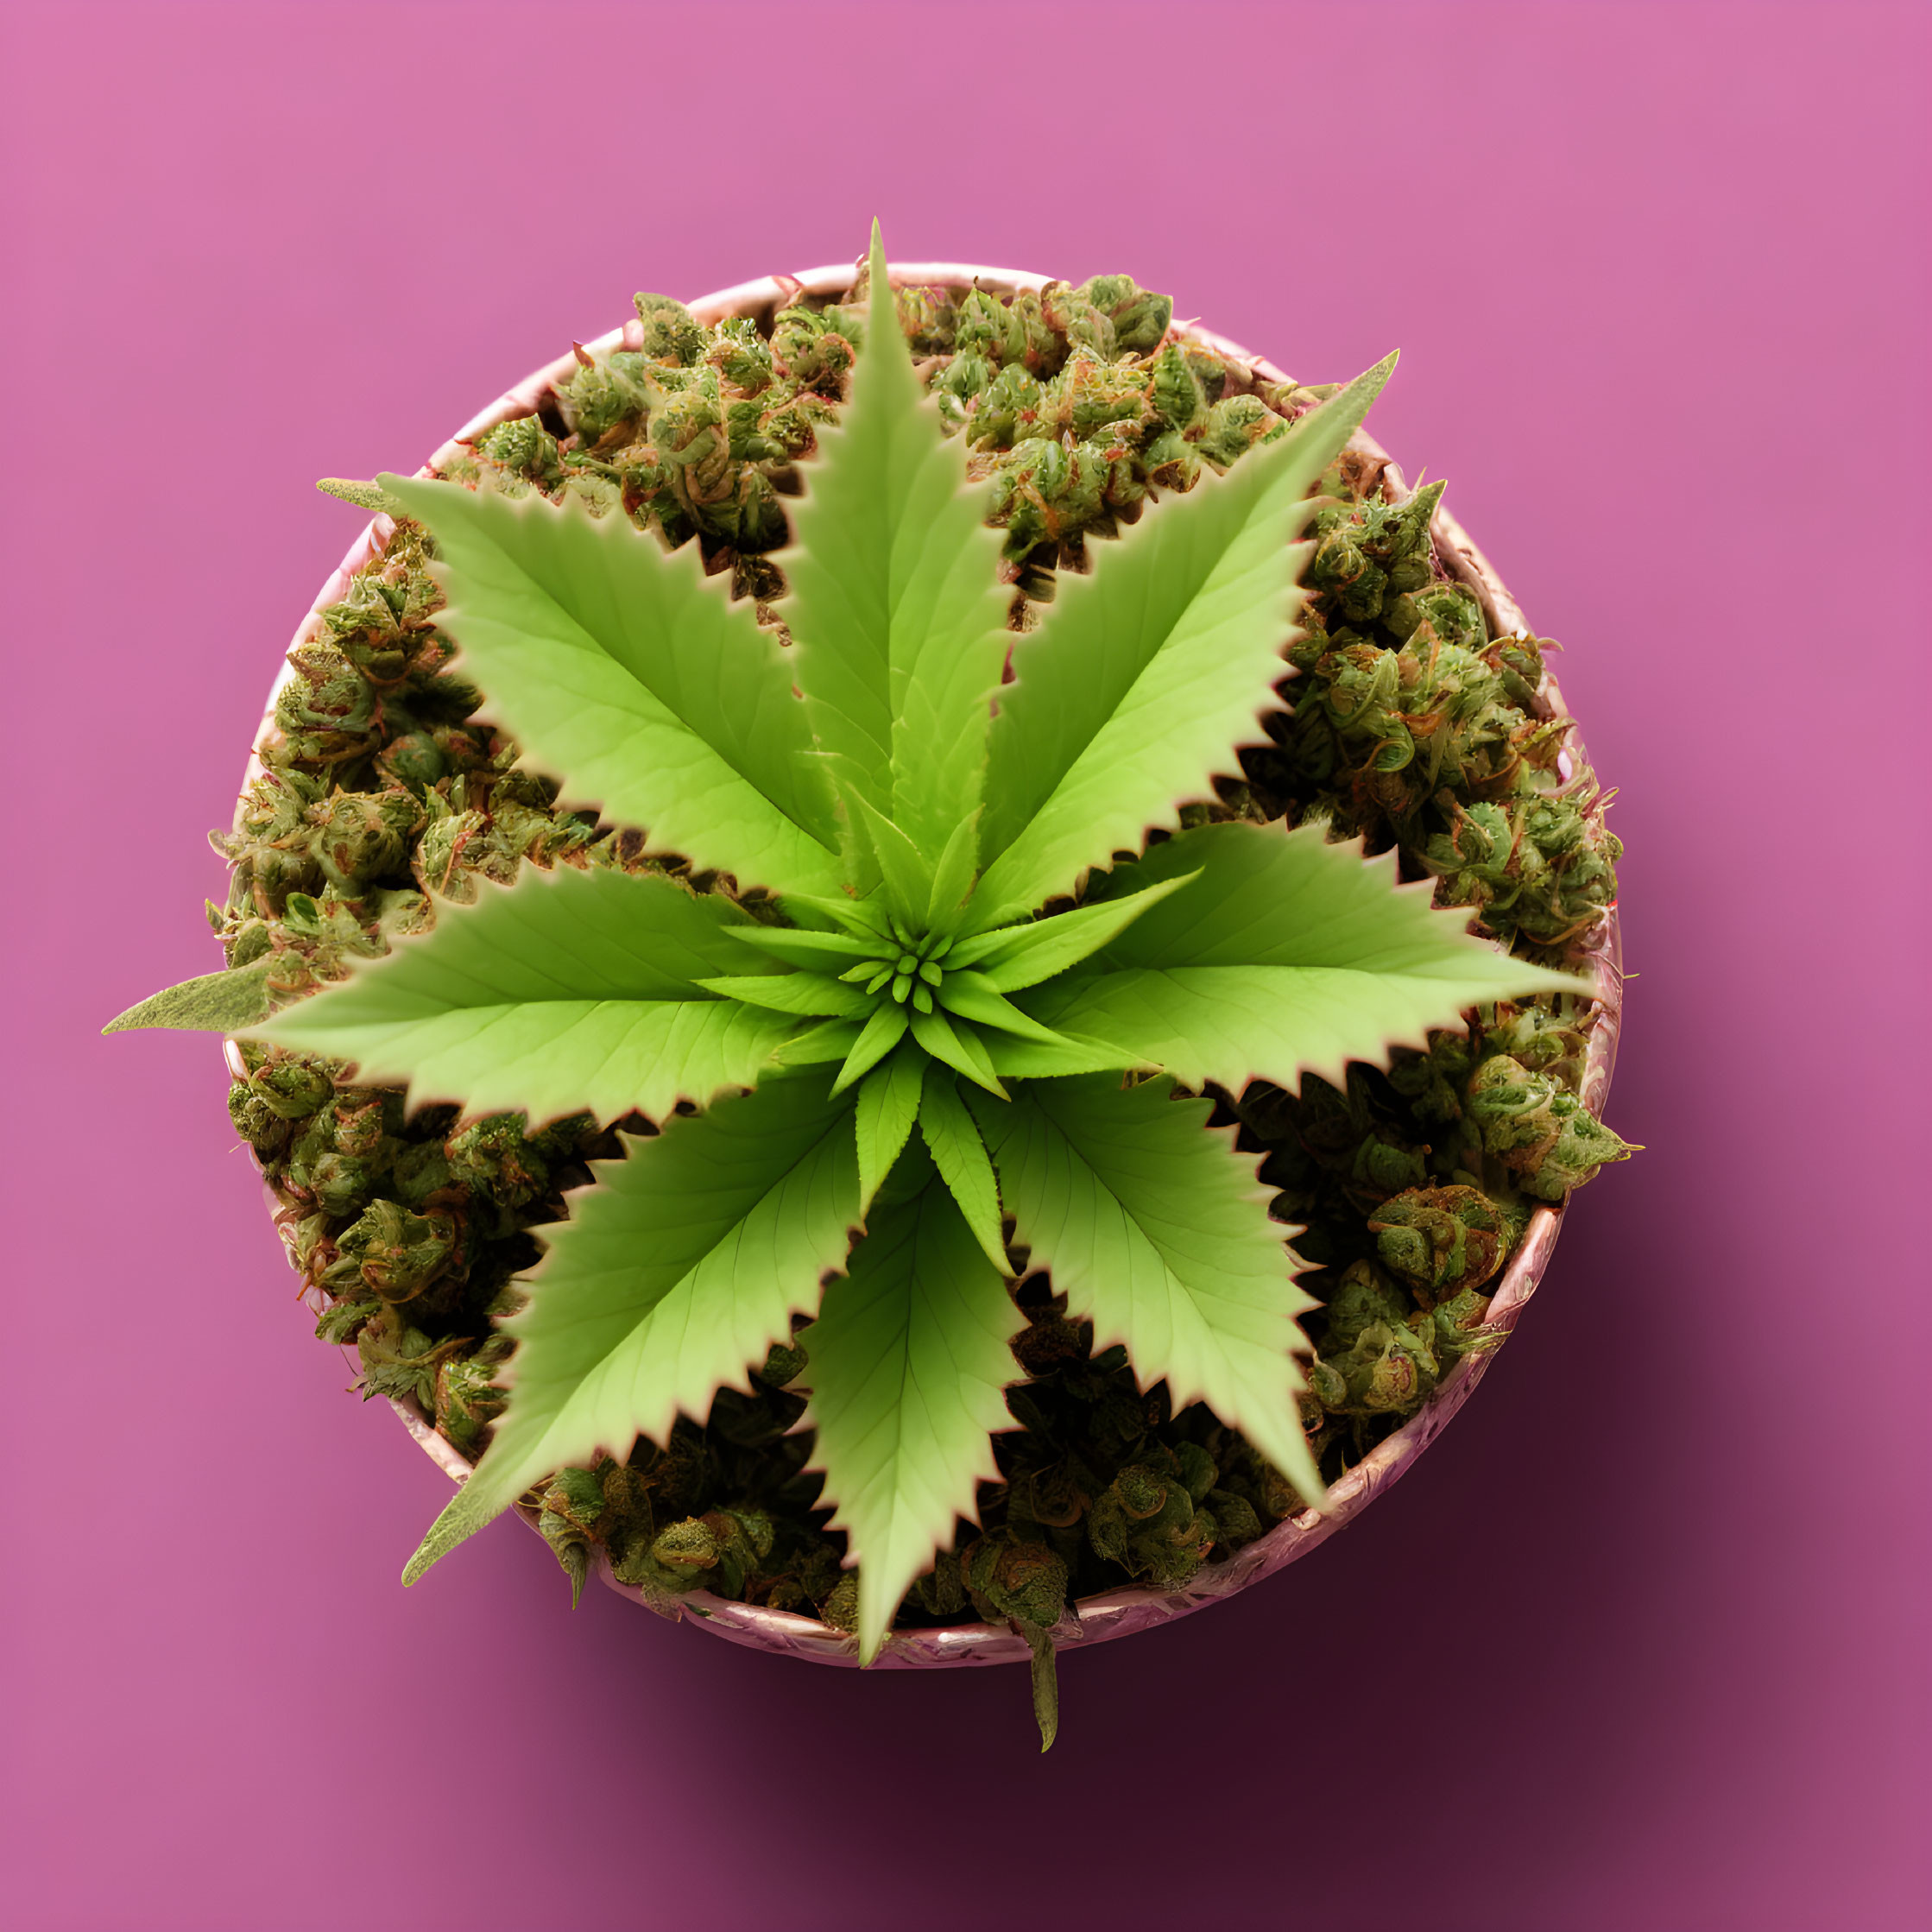 Green Cannabis Plant with Broad Leaves and Dried Buds on Purple Background